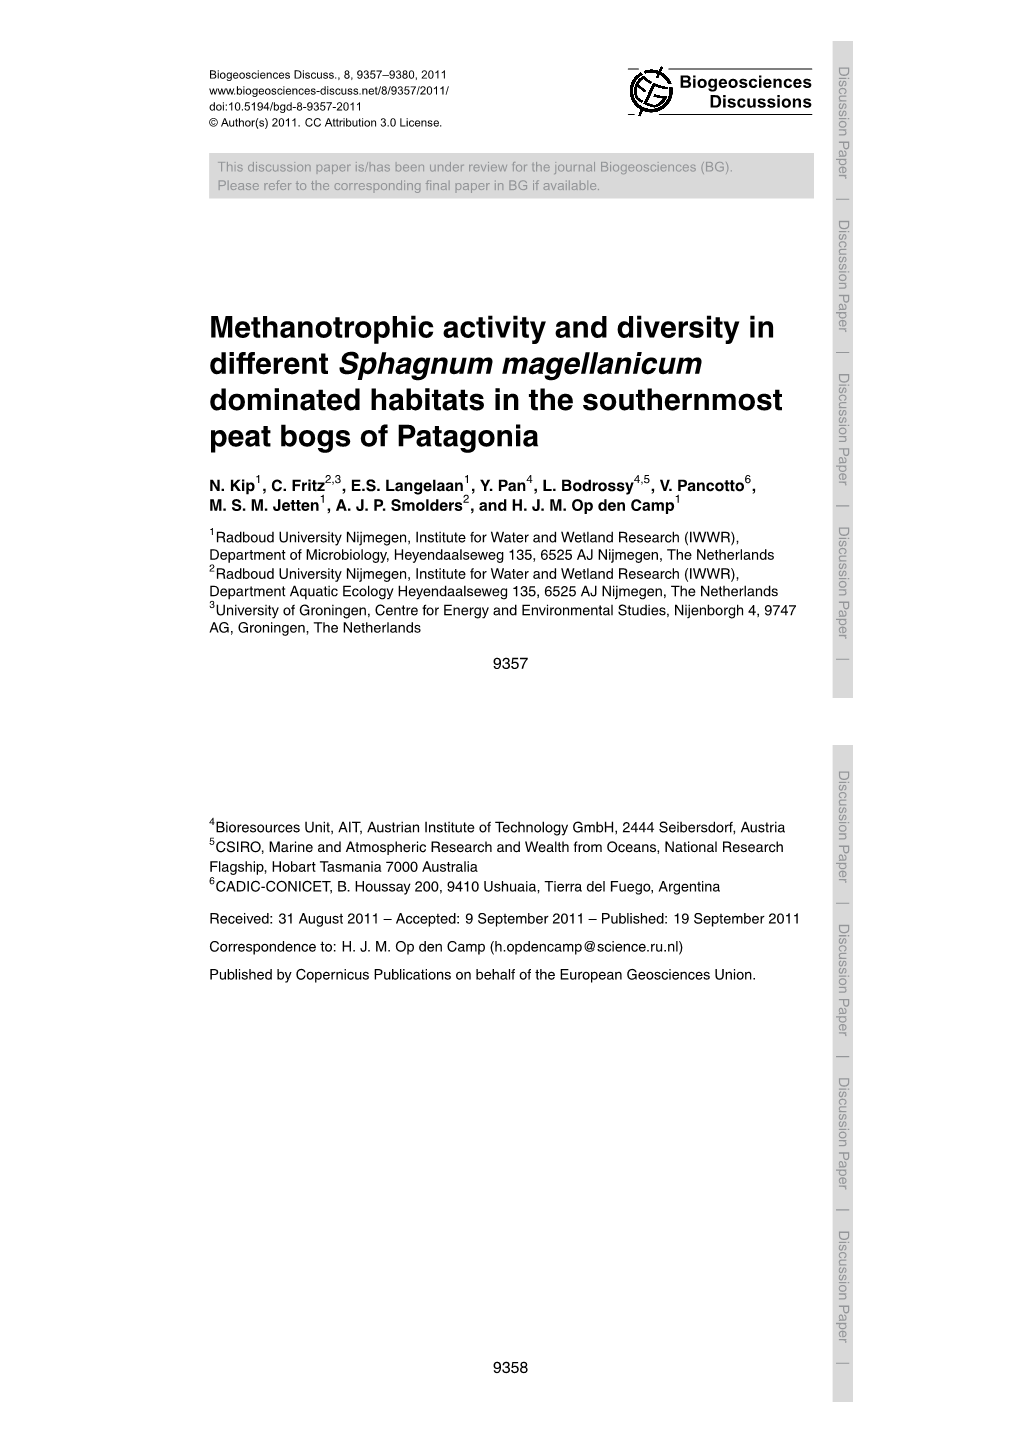 Methanotrophic Activity and Diversity in Different Sphagnum Magellanicum Dominated Habitats in the Southernmost Peat Bogs Of